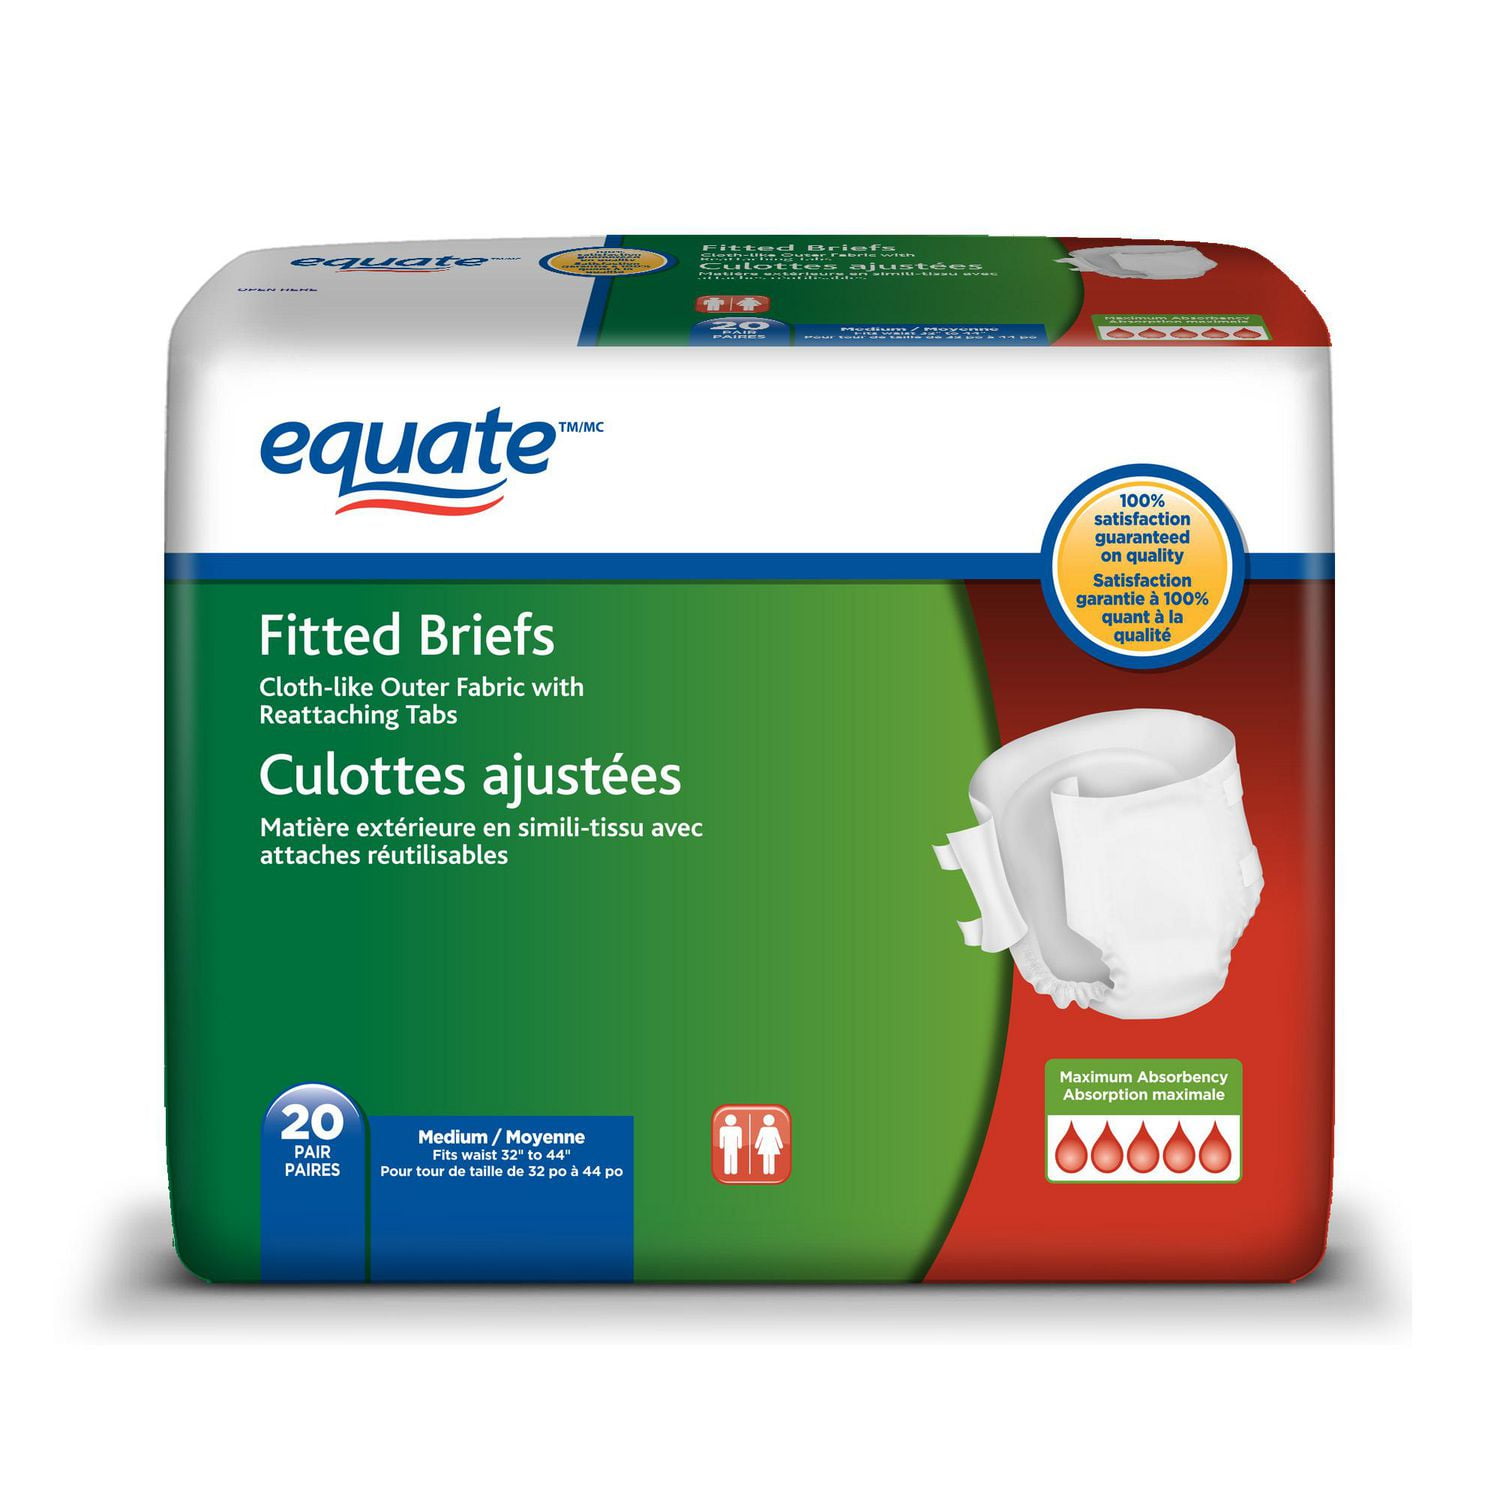 Equate Assurance Stretch Brief with Tabs Size S/M 40pc Unisex